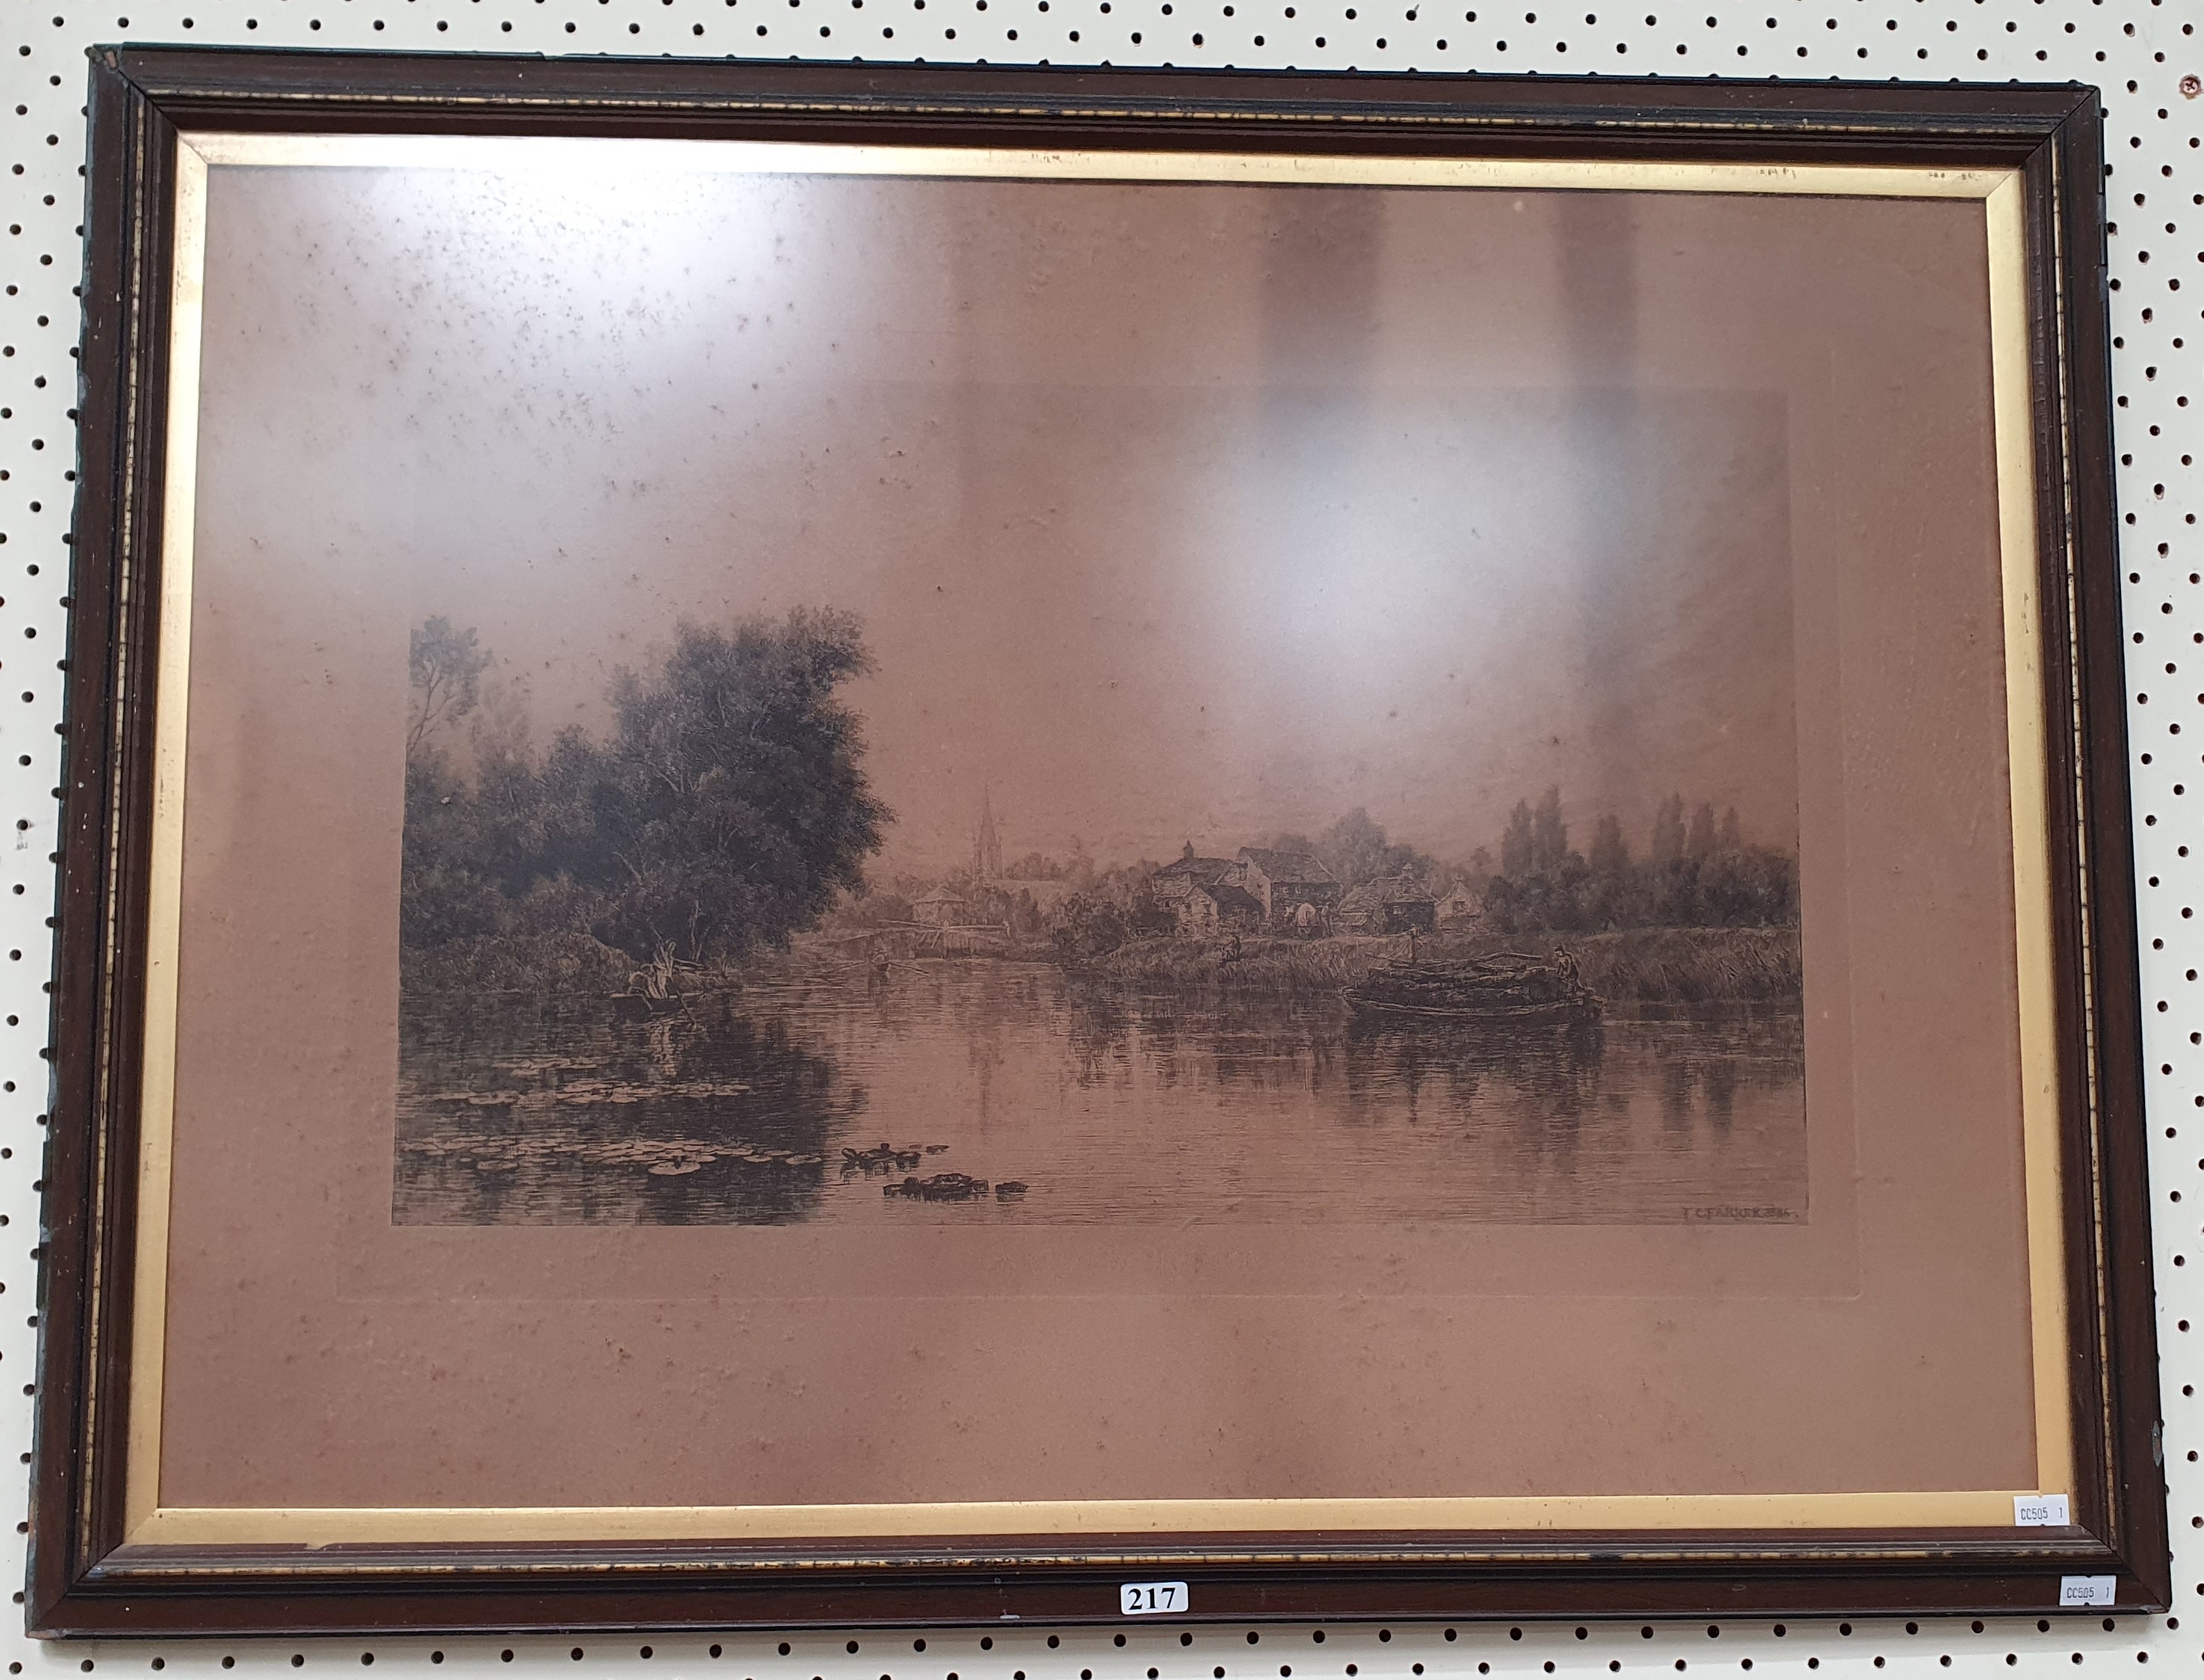 Artwork by Thomas Charles Farrer, Marlow Lock, Made of etching